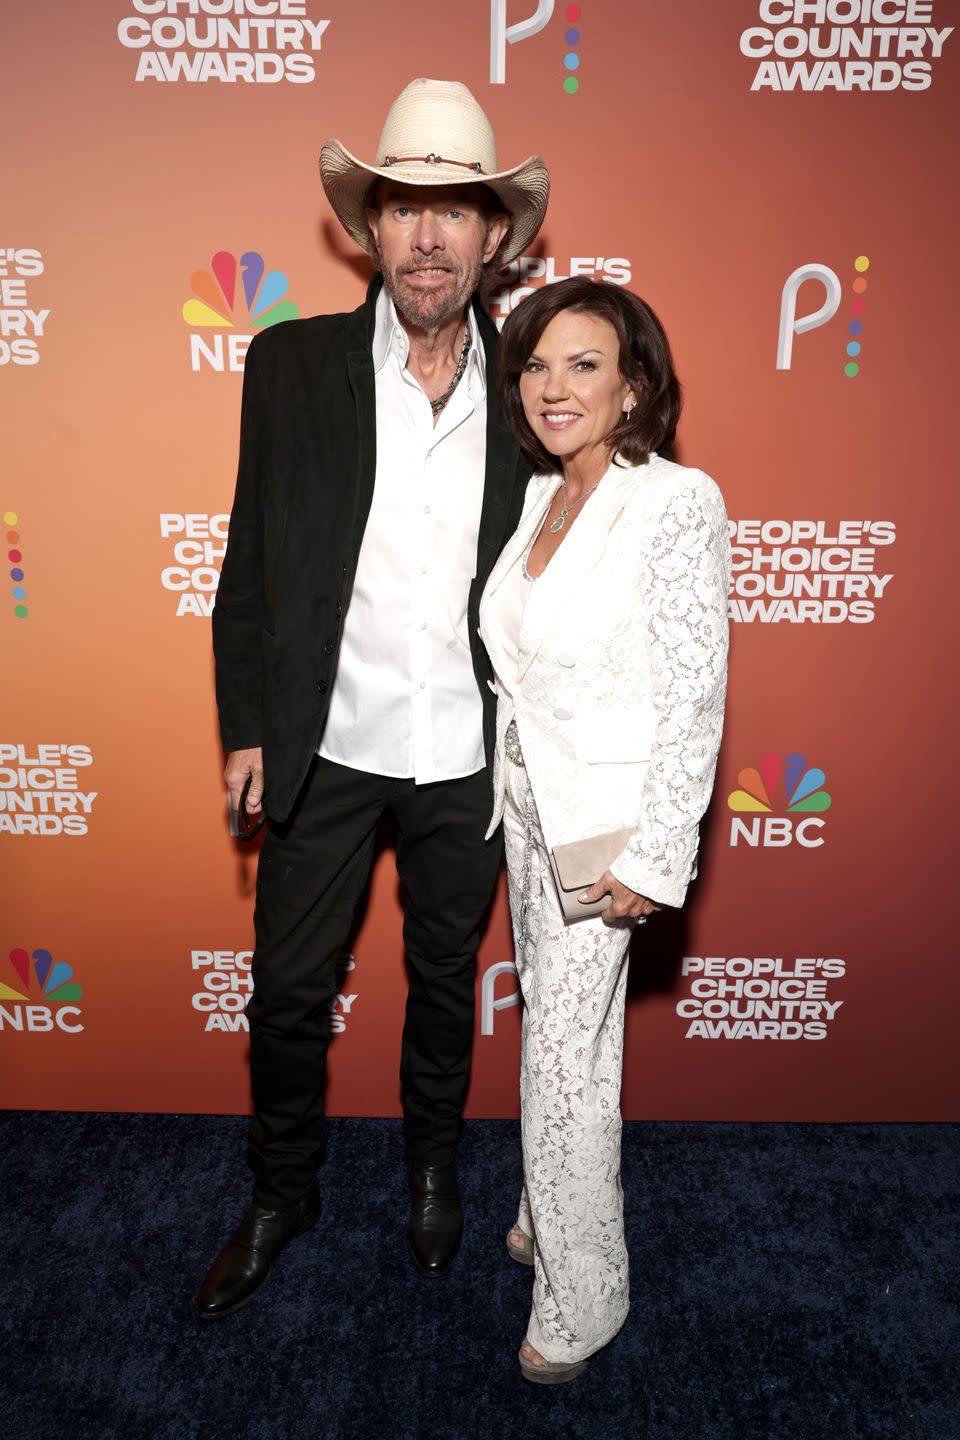 toby keith wearing a cowboy hat and posing for a photo with tricia lucus who wears all white